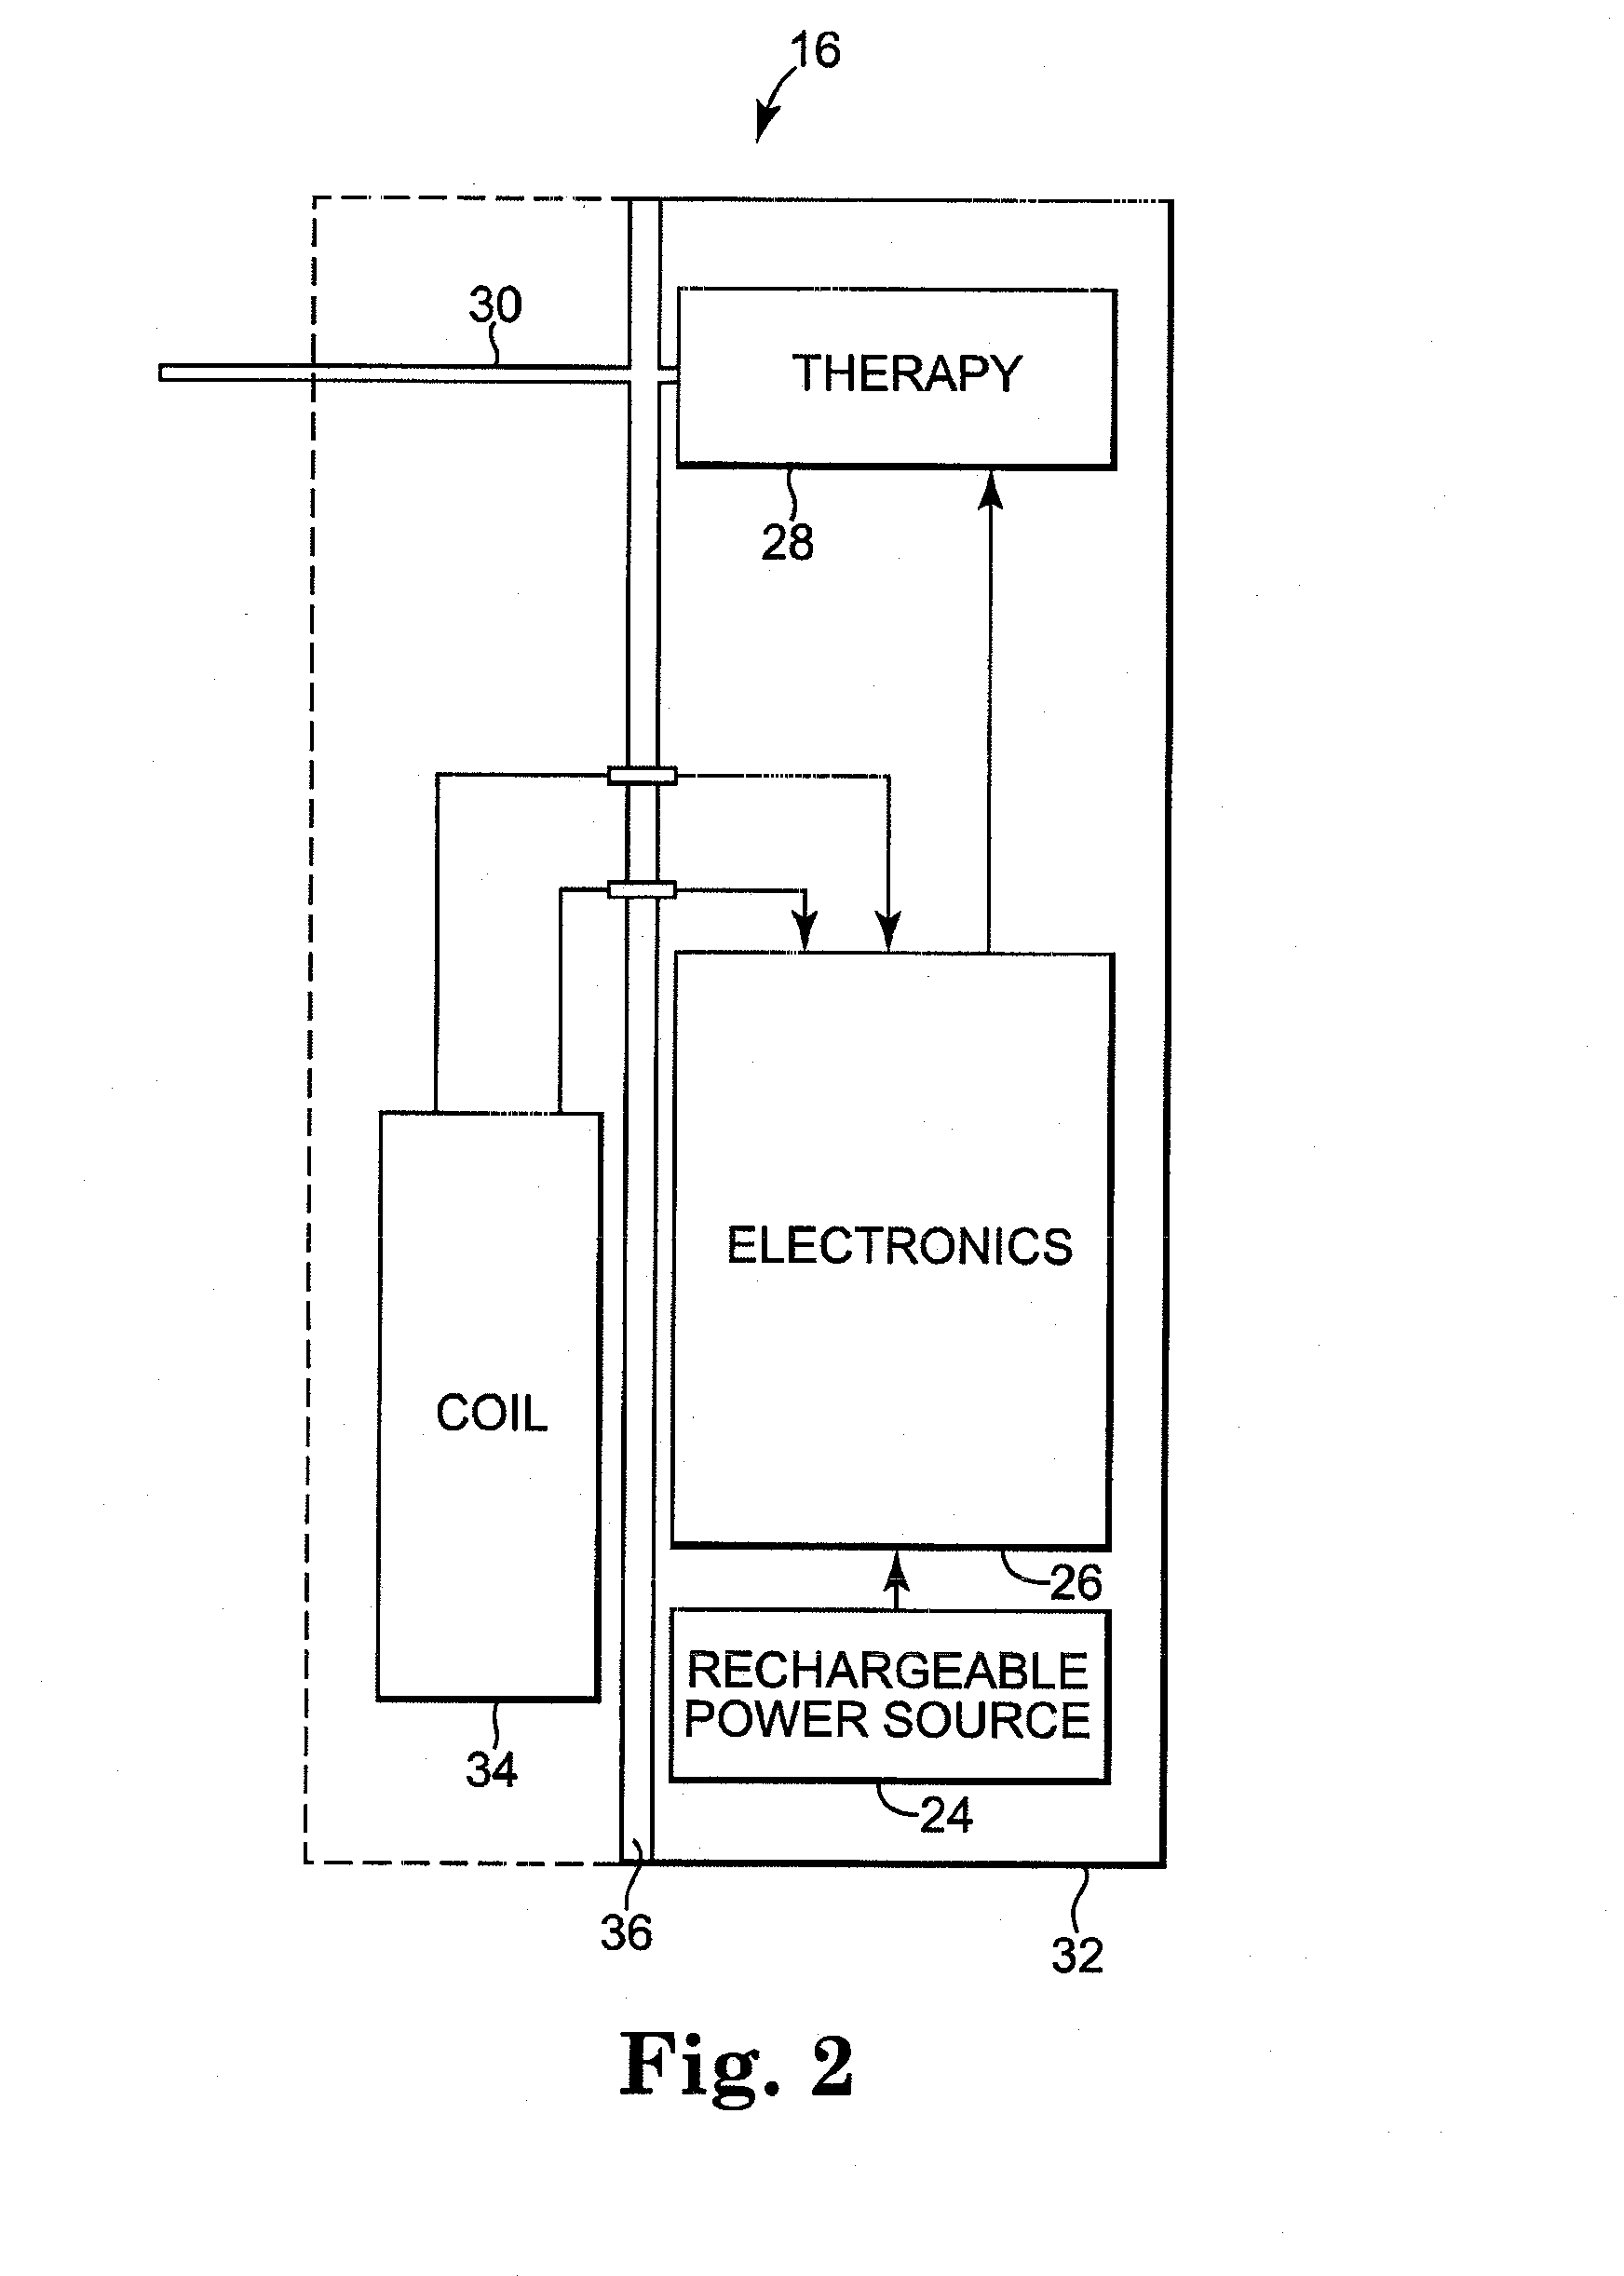 Method of Energy Transfer to an Implantable Medical Device While Coupling Energy to Charging Unit